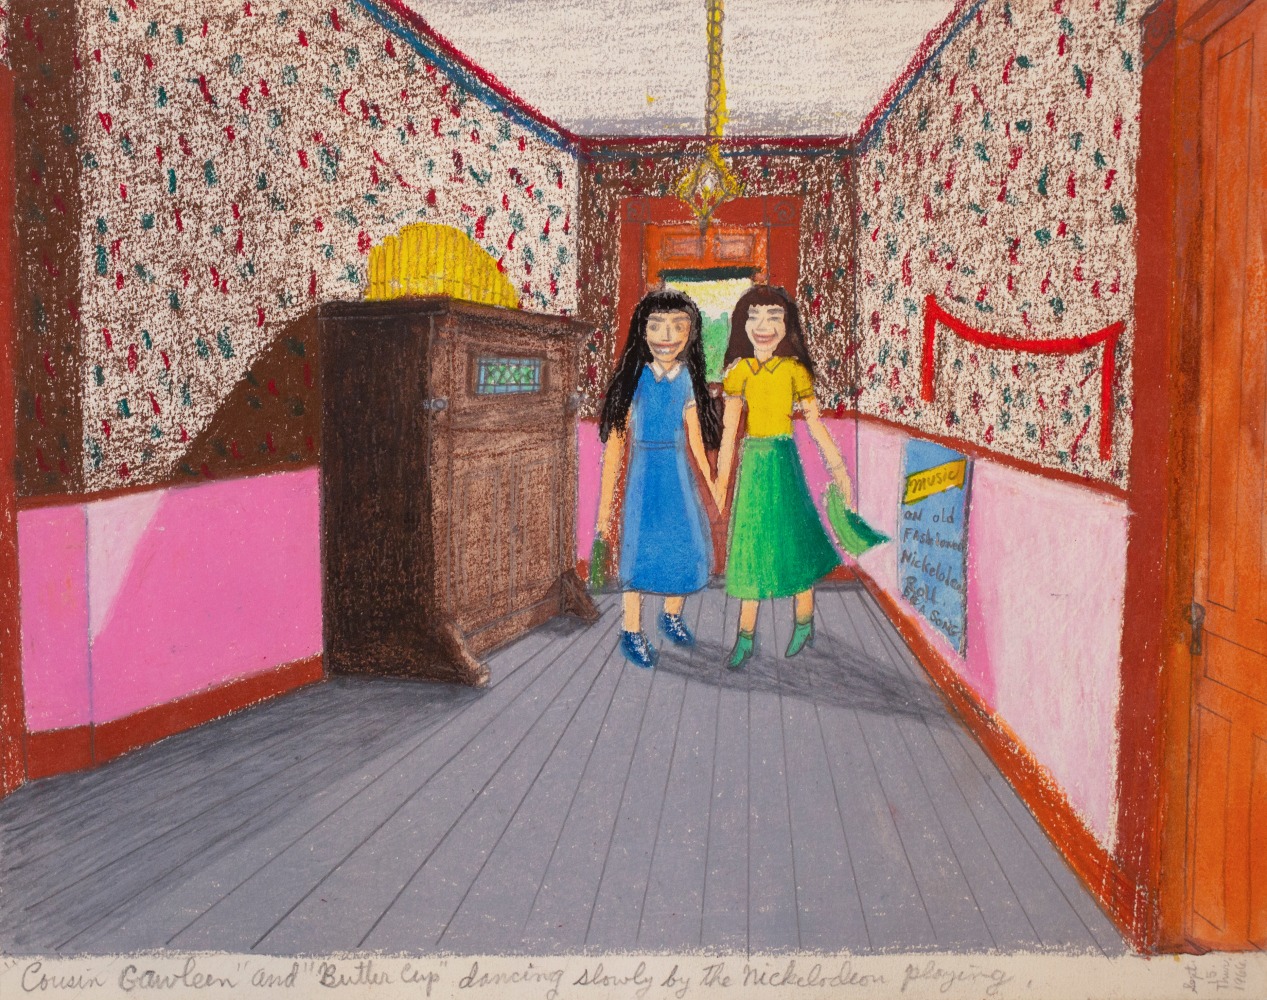 &amp;quot;Cousins Gawleen&amp;quot; and &amp;quot;Butter Cup&amp;quot; dancing slowly by the nickelodeon playing, 1966
Colored pencil, ballpoint pen, and crayon on paper
9 x 12 inches